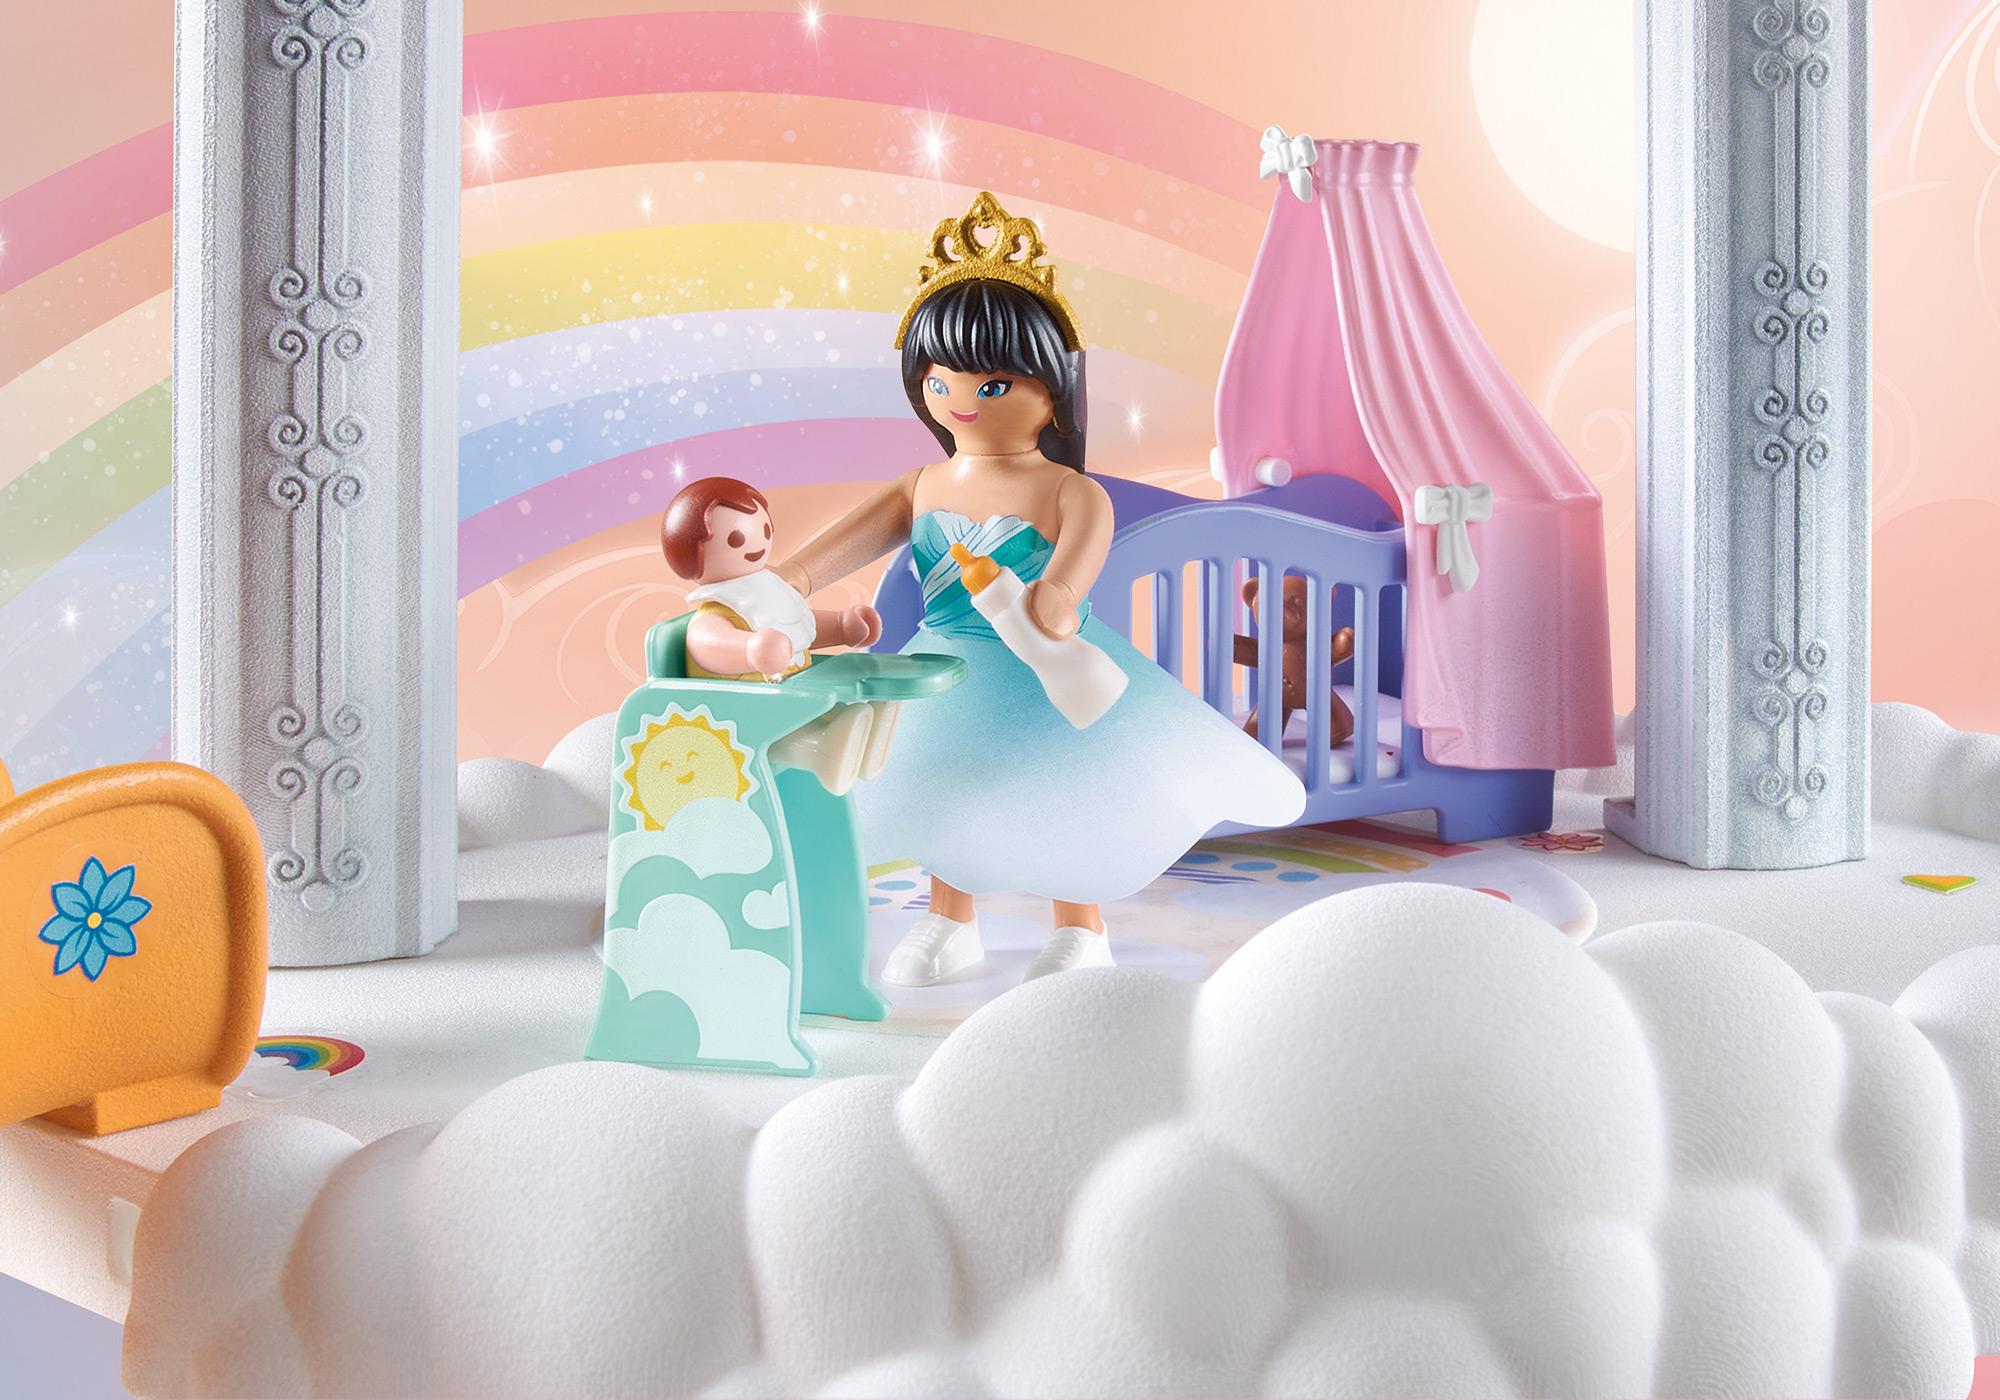 Playmobil Rainbow Castle in the Clouds - The Happy Lark